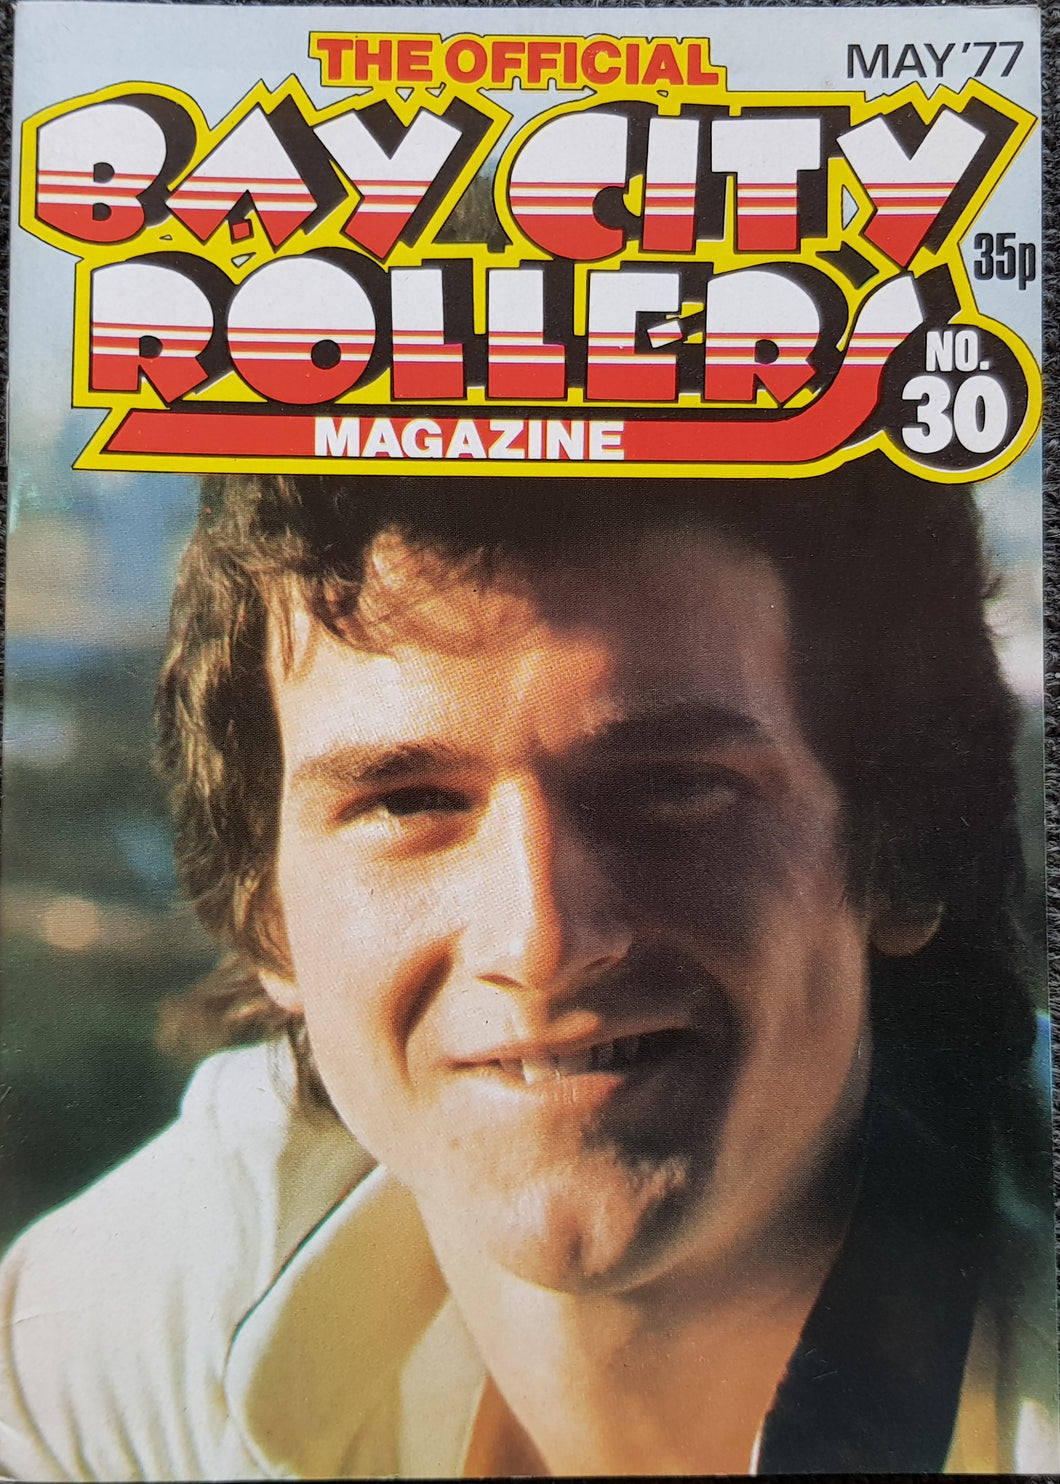 Bay City Rollers - The Official Bay City Rollers Magazine No.30